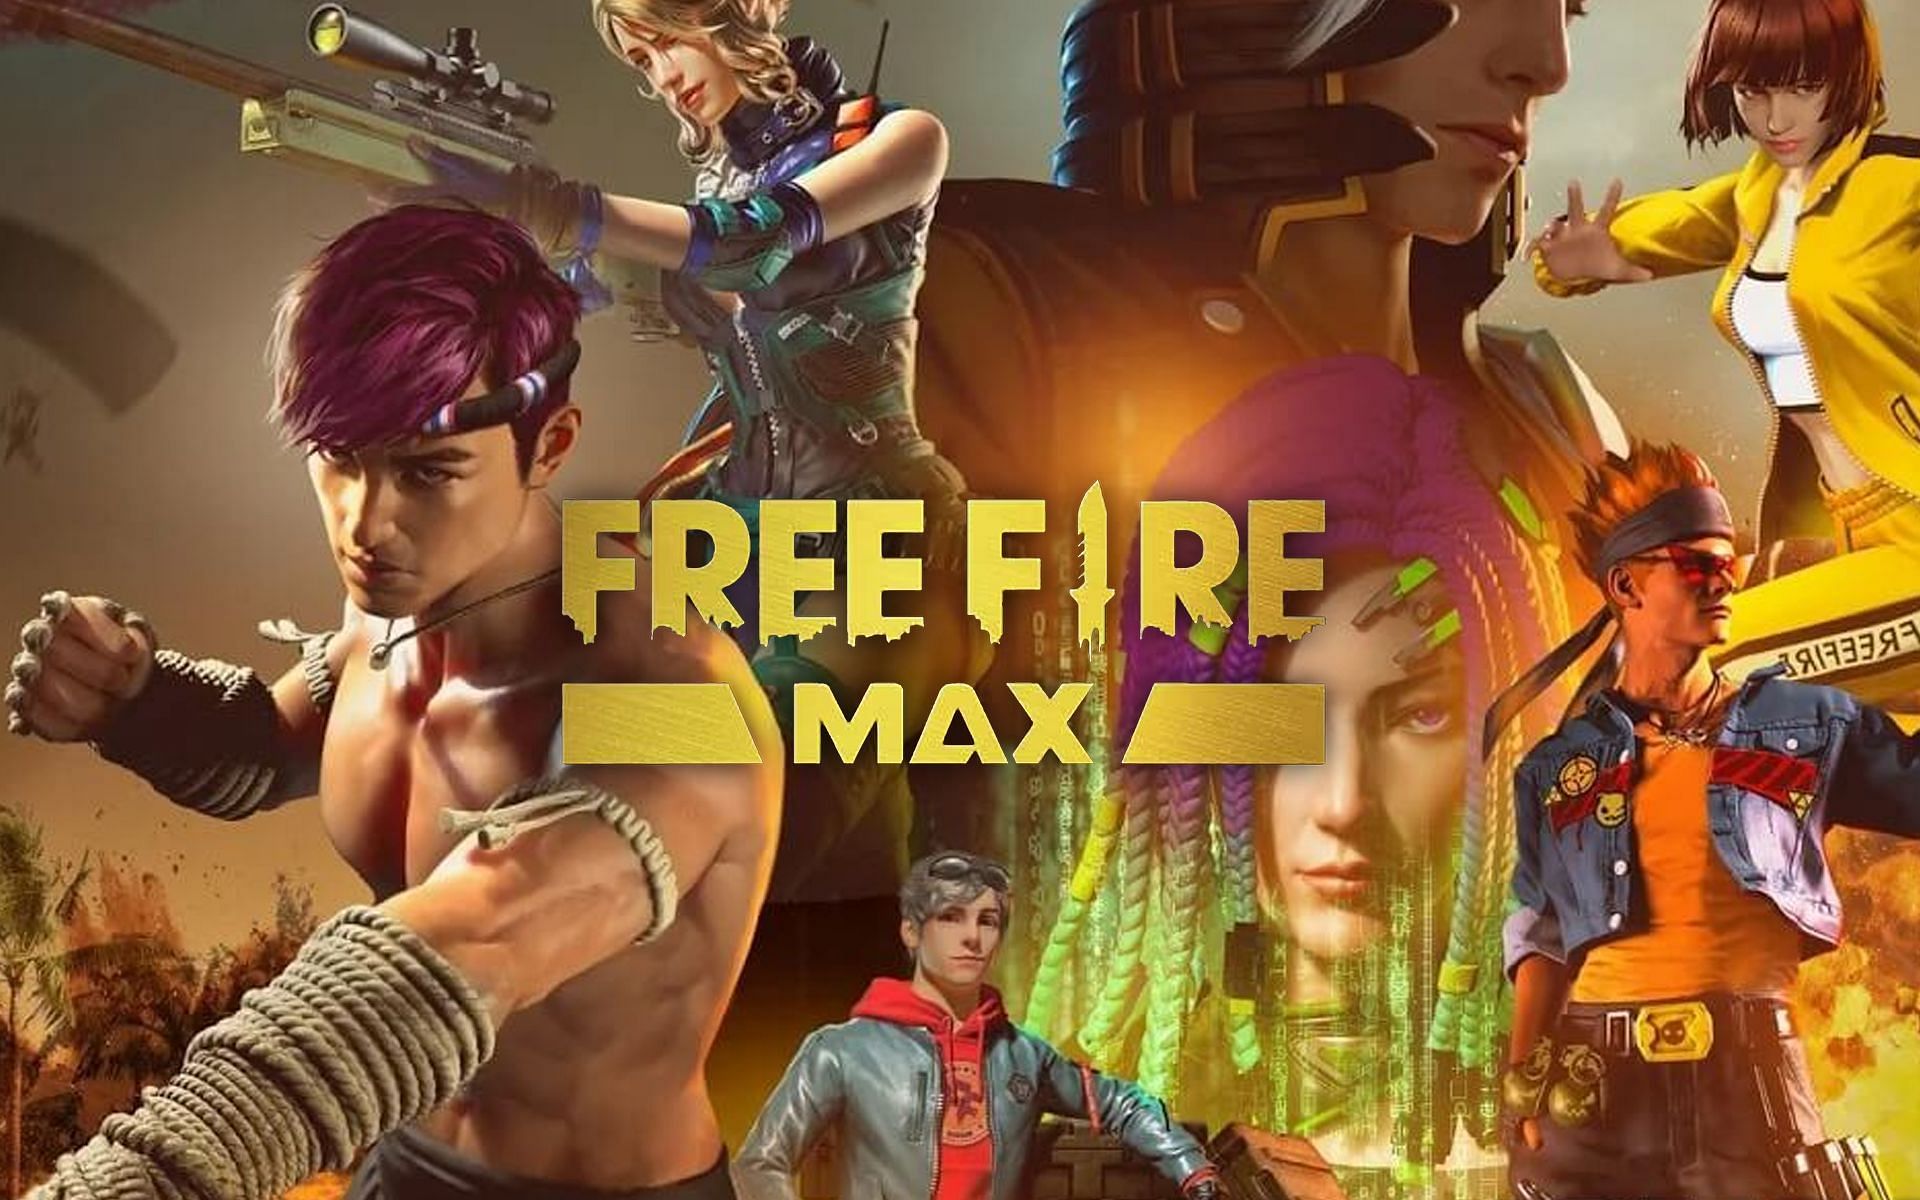 5 best Free Fire MAX bundles to get from store in October 2021